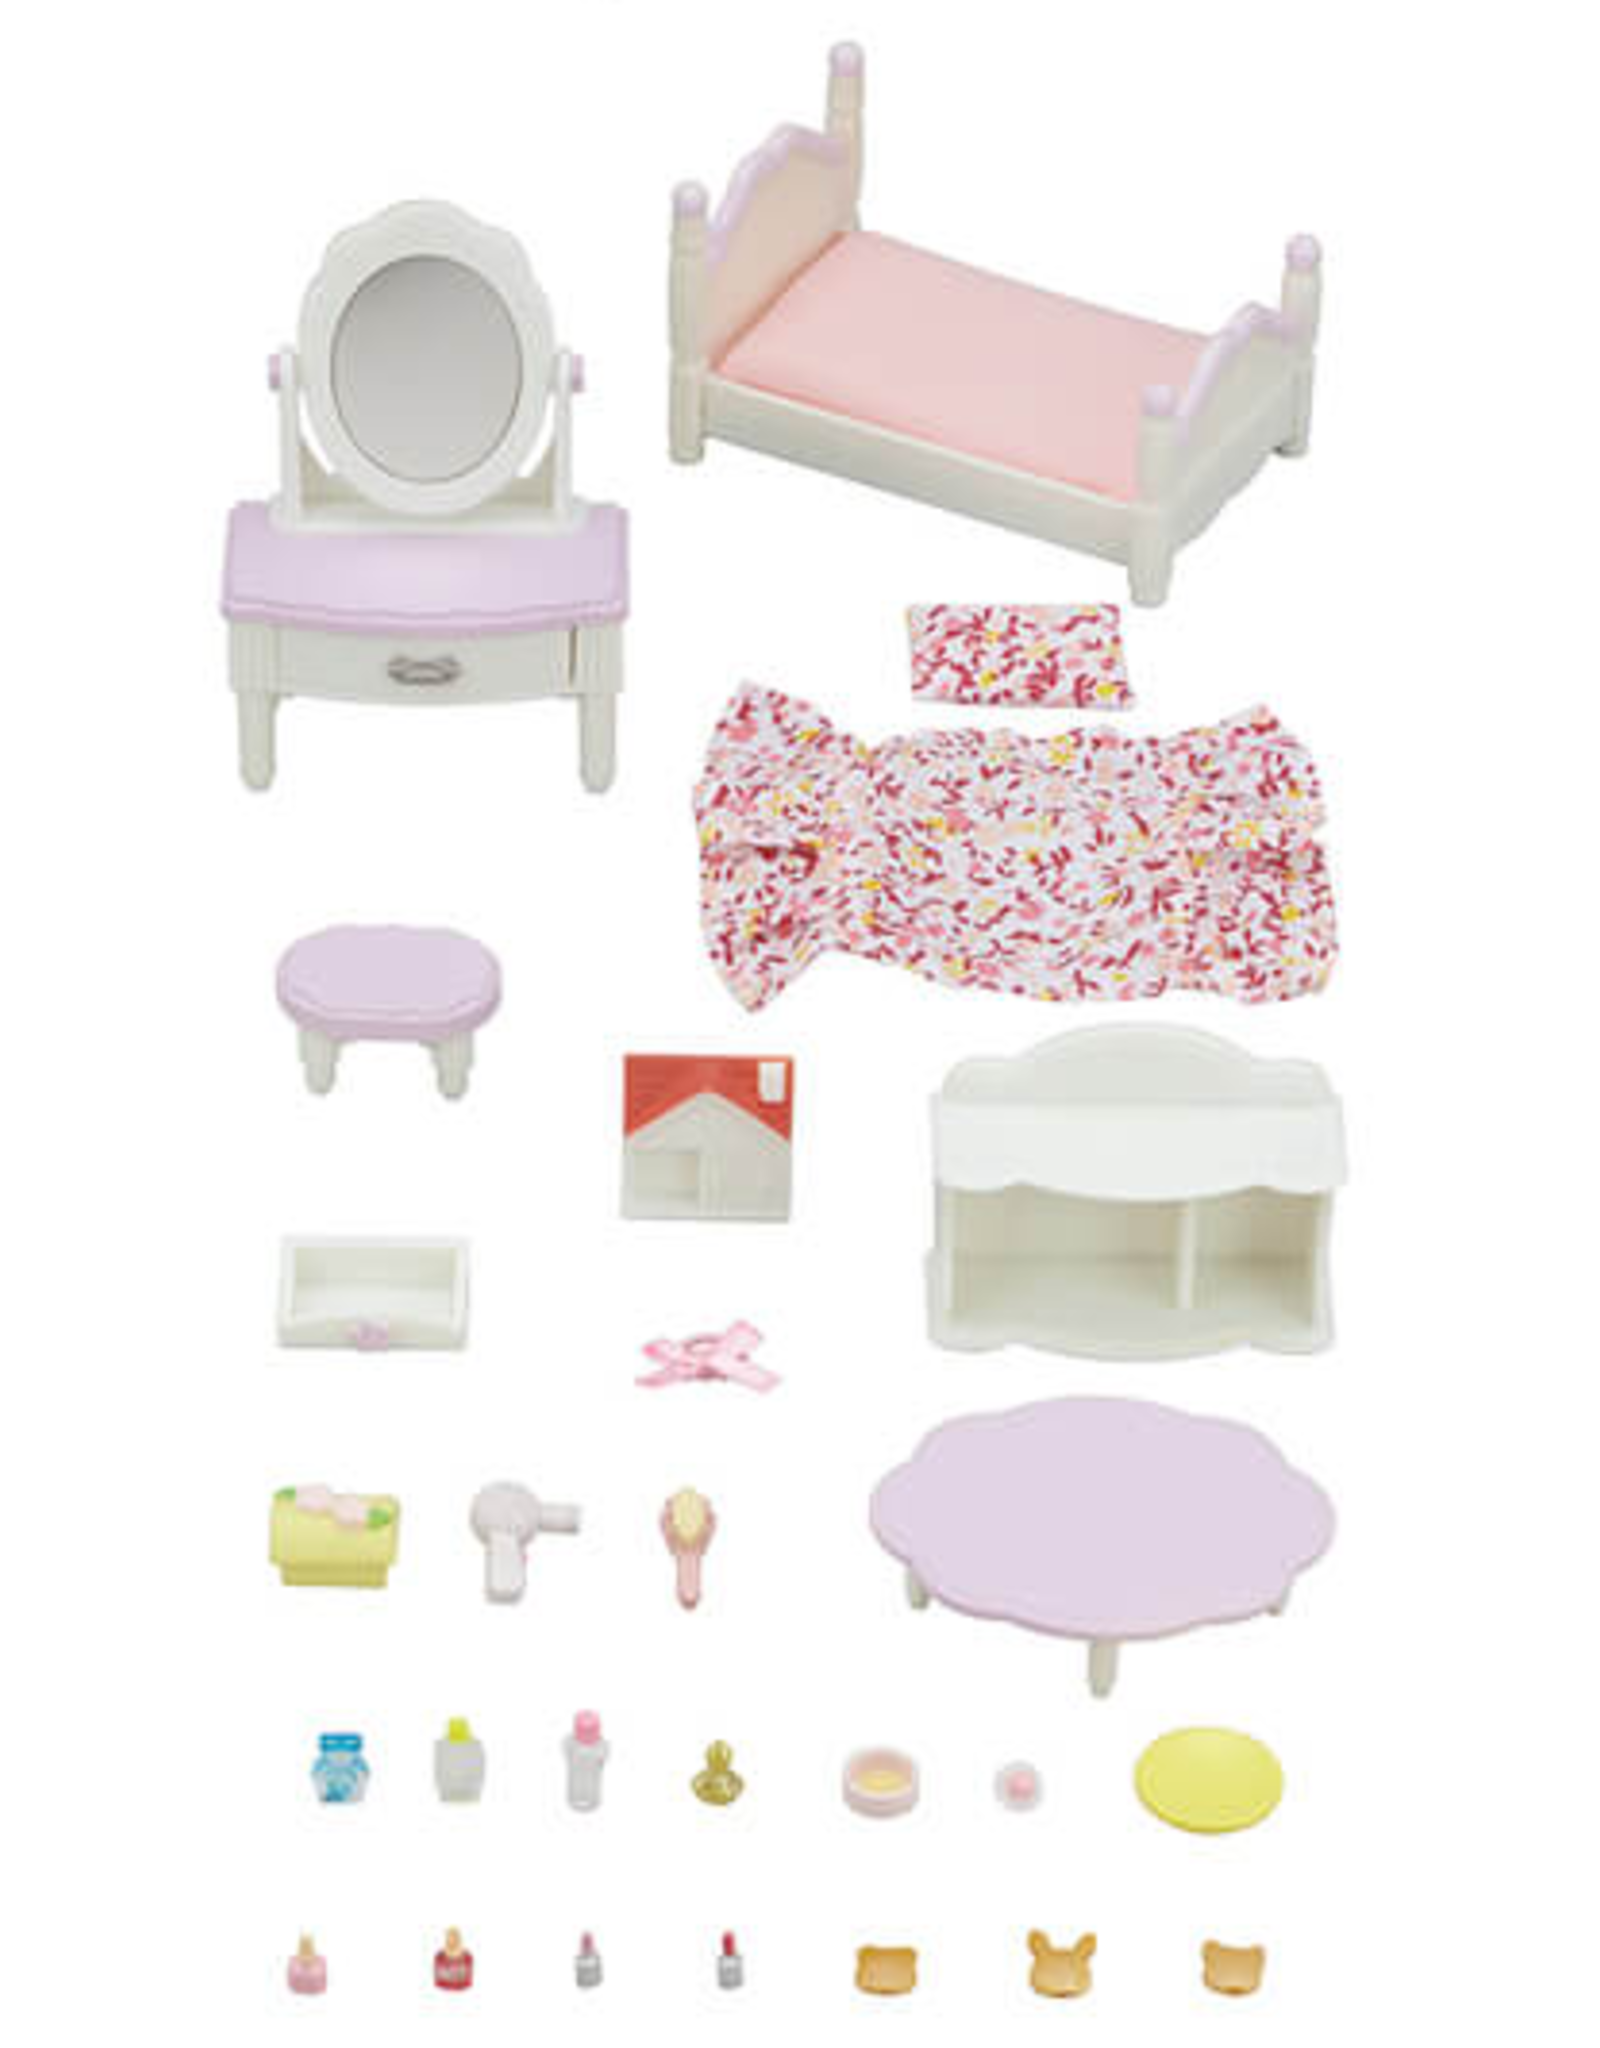 Calico Critters Calico Critters - Bedroom & Vanity Set